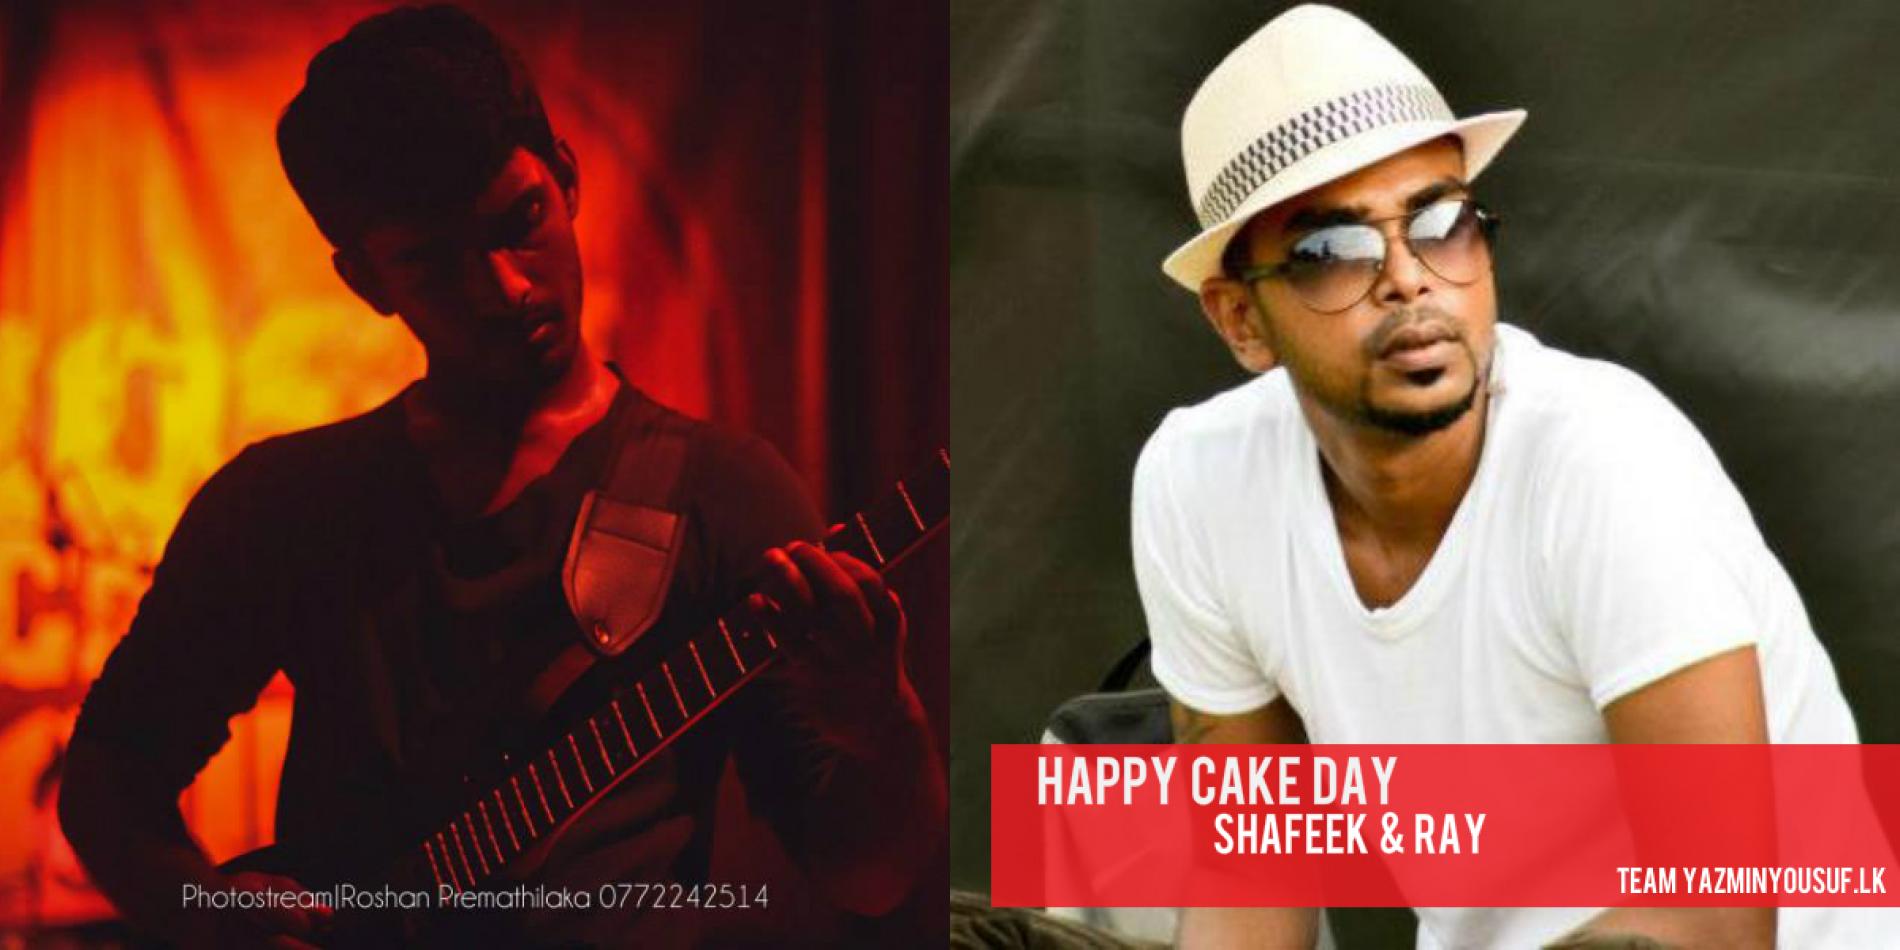 Happy Cake Day To Shafeek & Ray